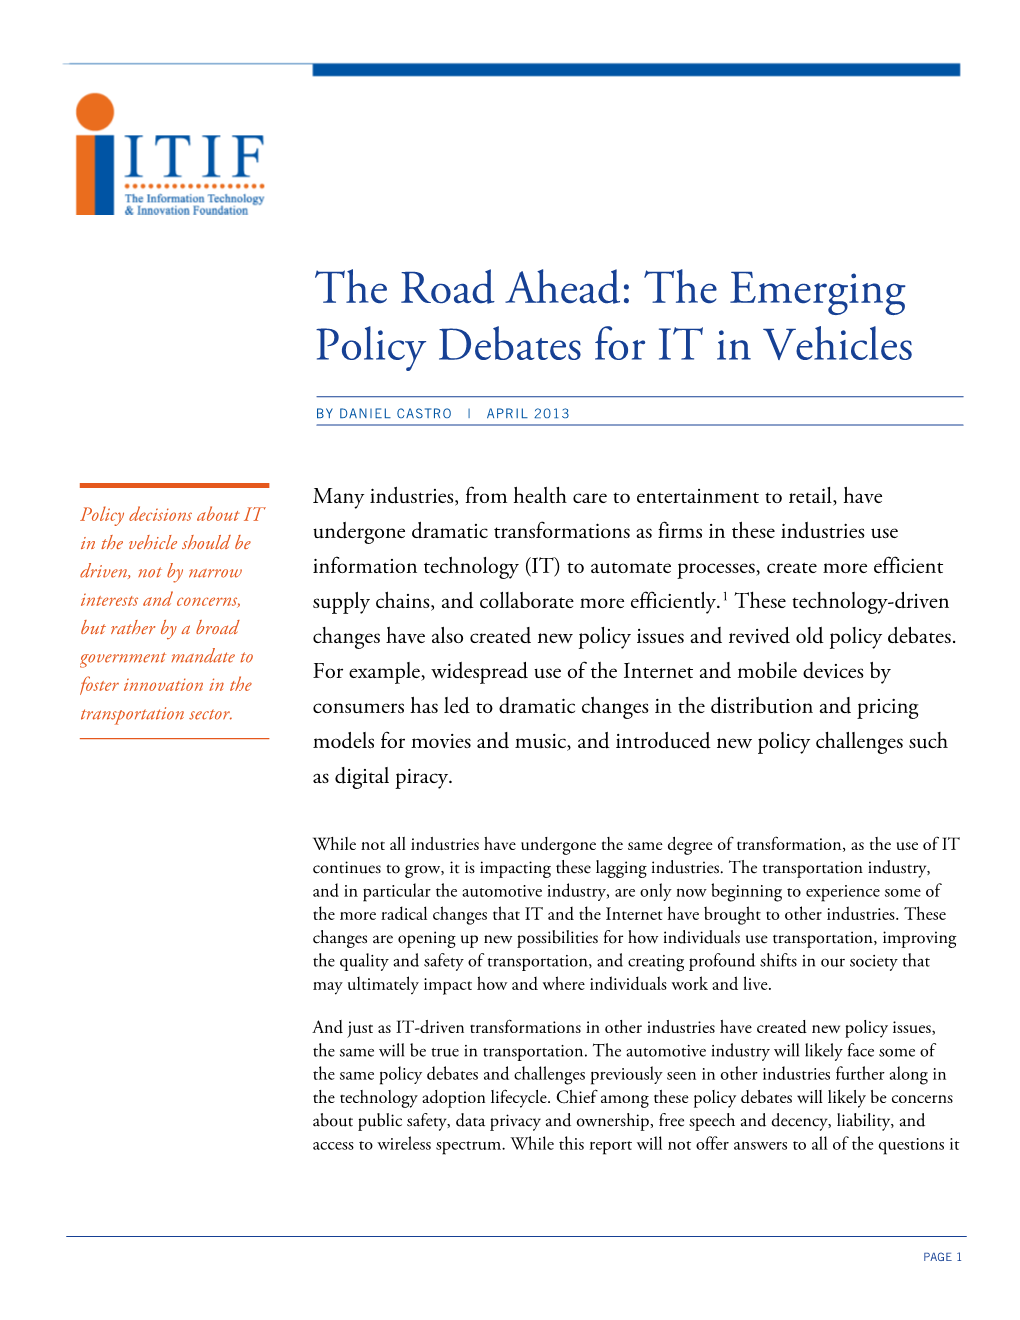 The Road Ahead: the Emerging Policy Debates for IT in Vehicles